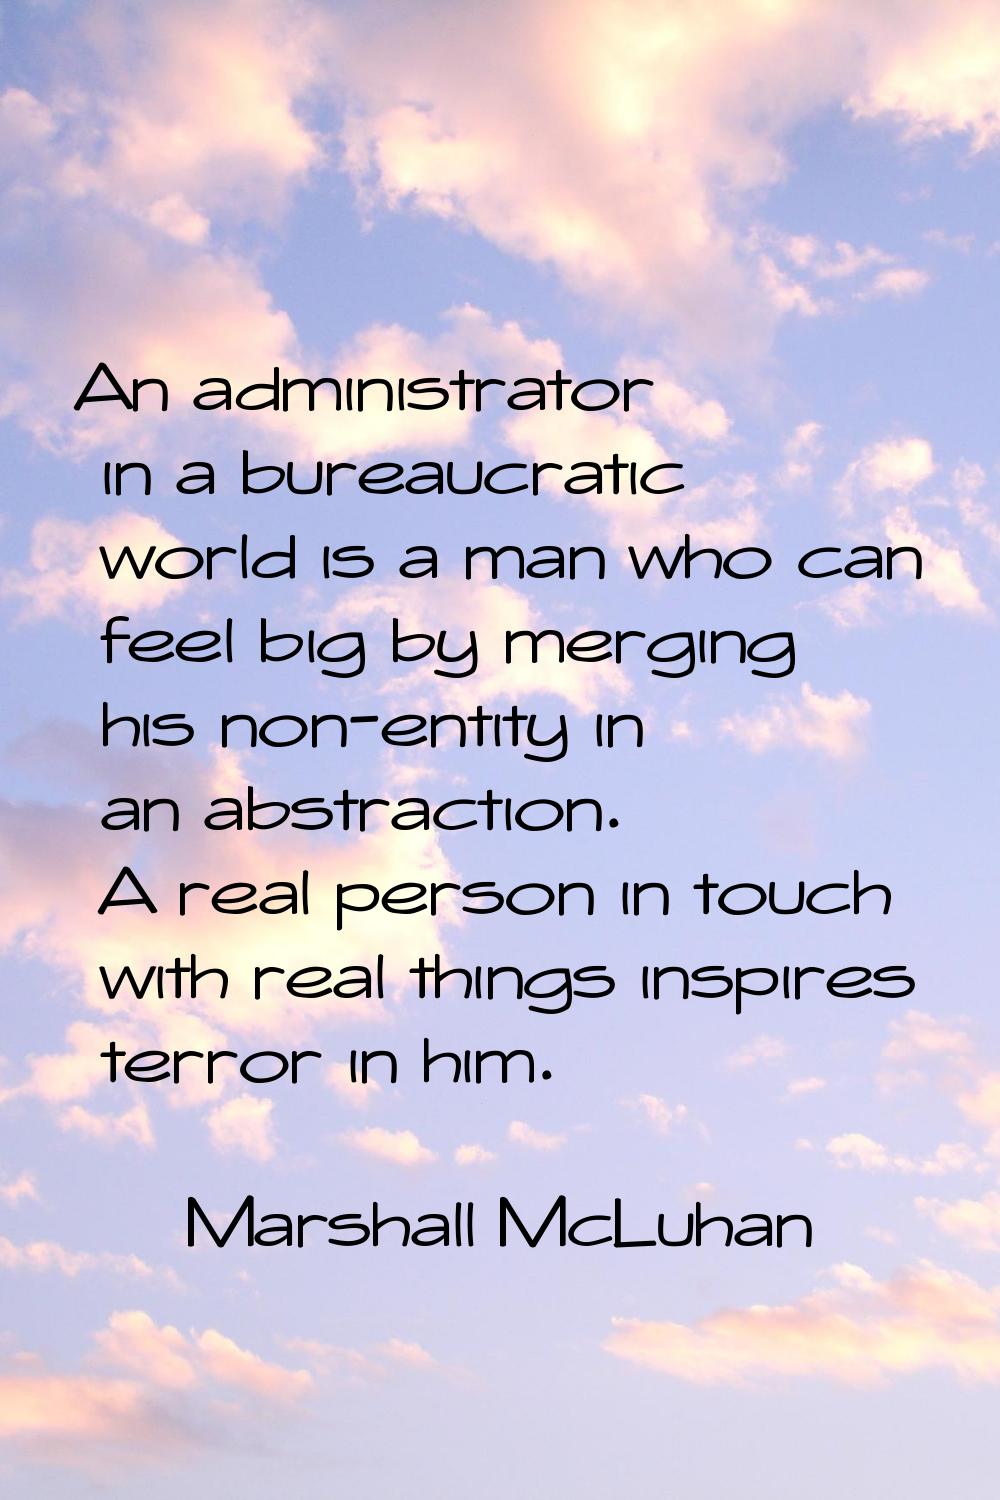 An administrator in a bureaucratic world is a man who can feel big by merging his non-entity in an 